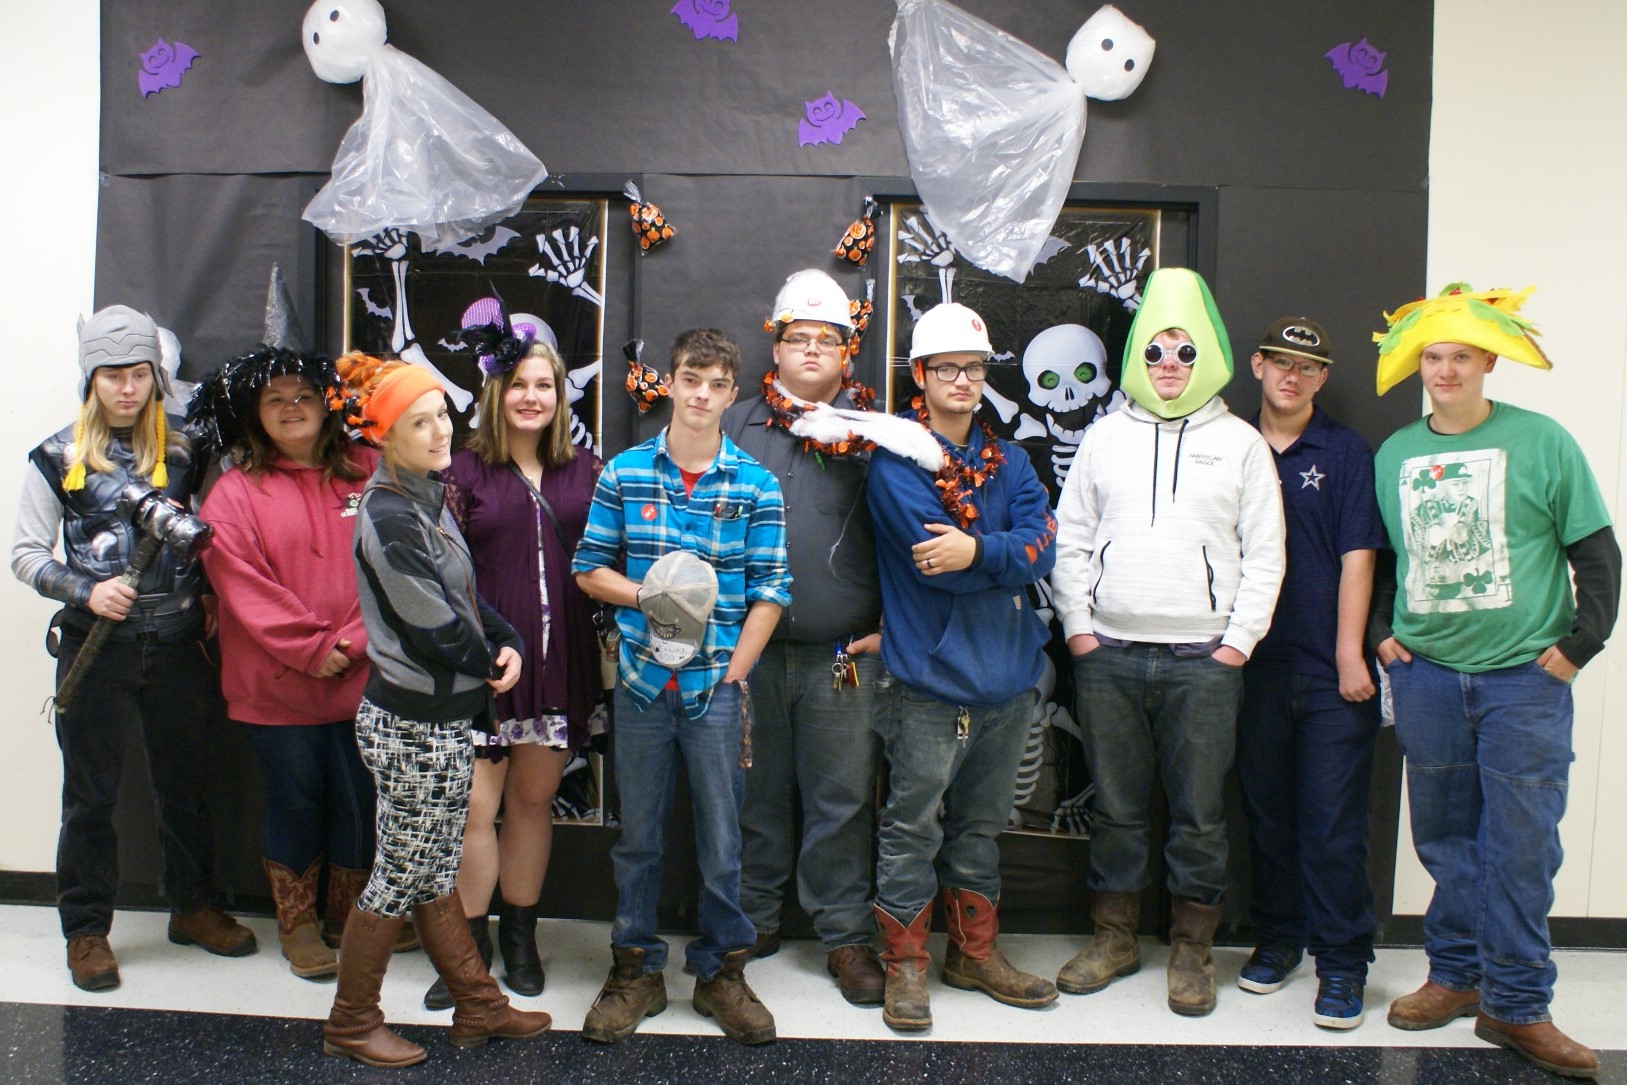 BCC "Staying Clean Club" Sponsors Halloween Activities